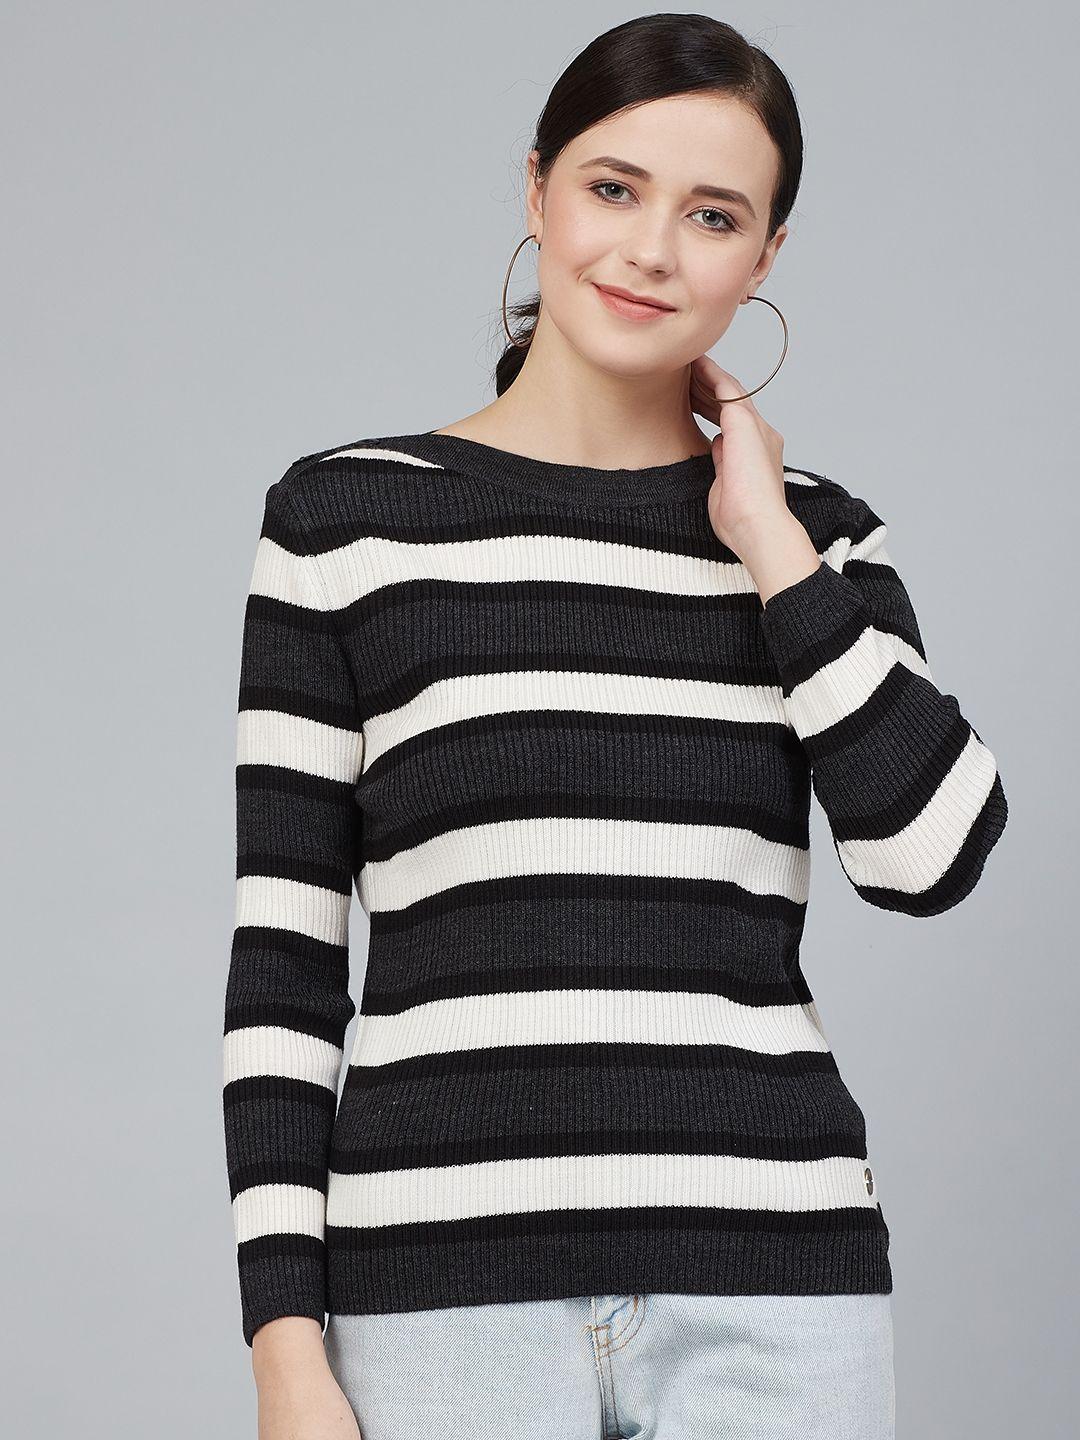 cayman-women-charcoal-grey-&-white-striped-pullover-acrylic-sweater